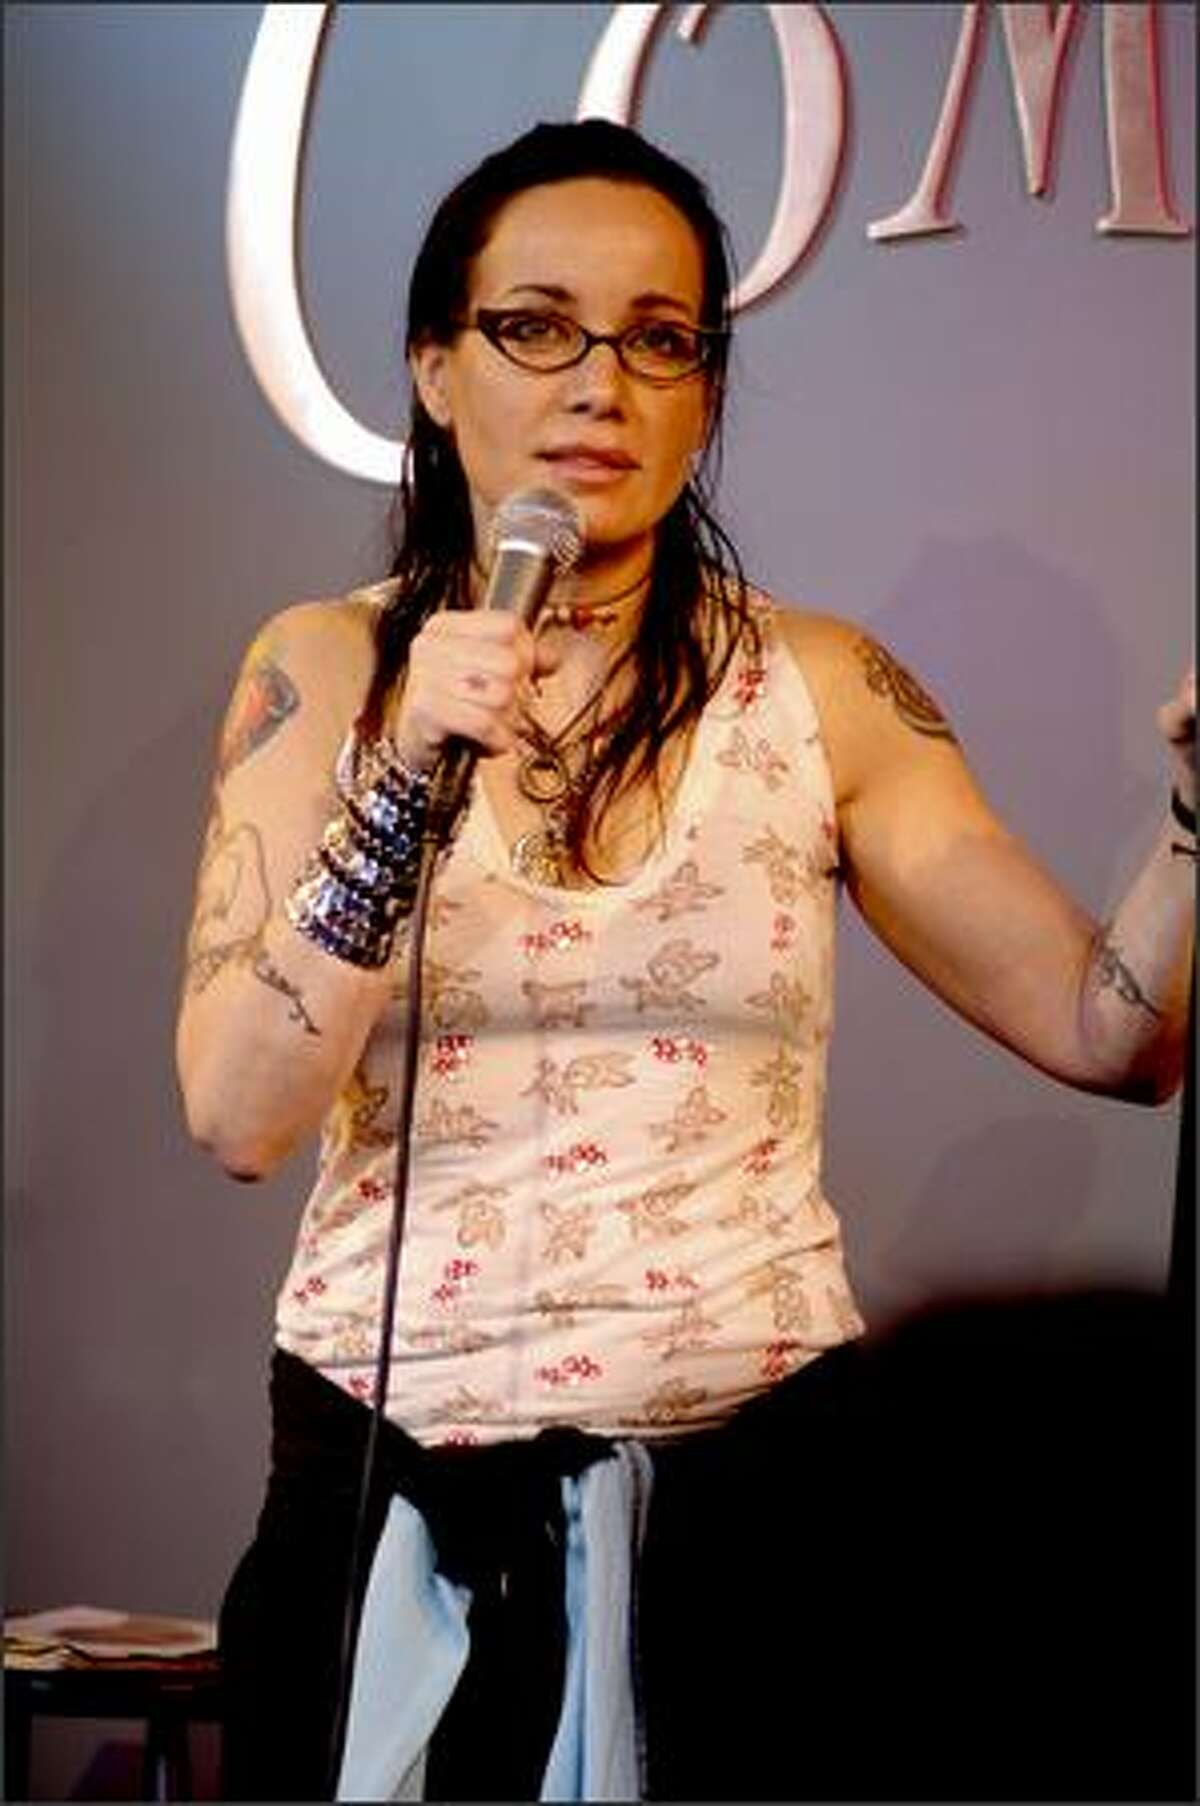 Janeane Garofalo performs at an evening with the writers and performers of Saturday Night Live at Comix on January 7, 2008 in New York City.